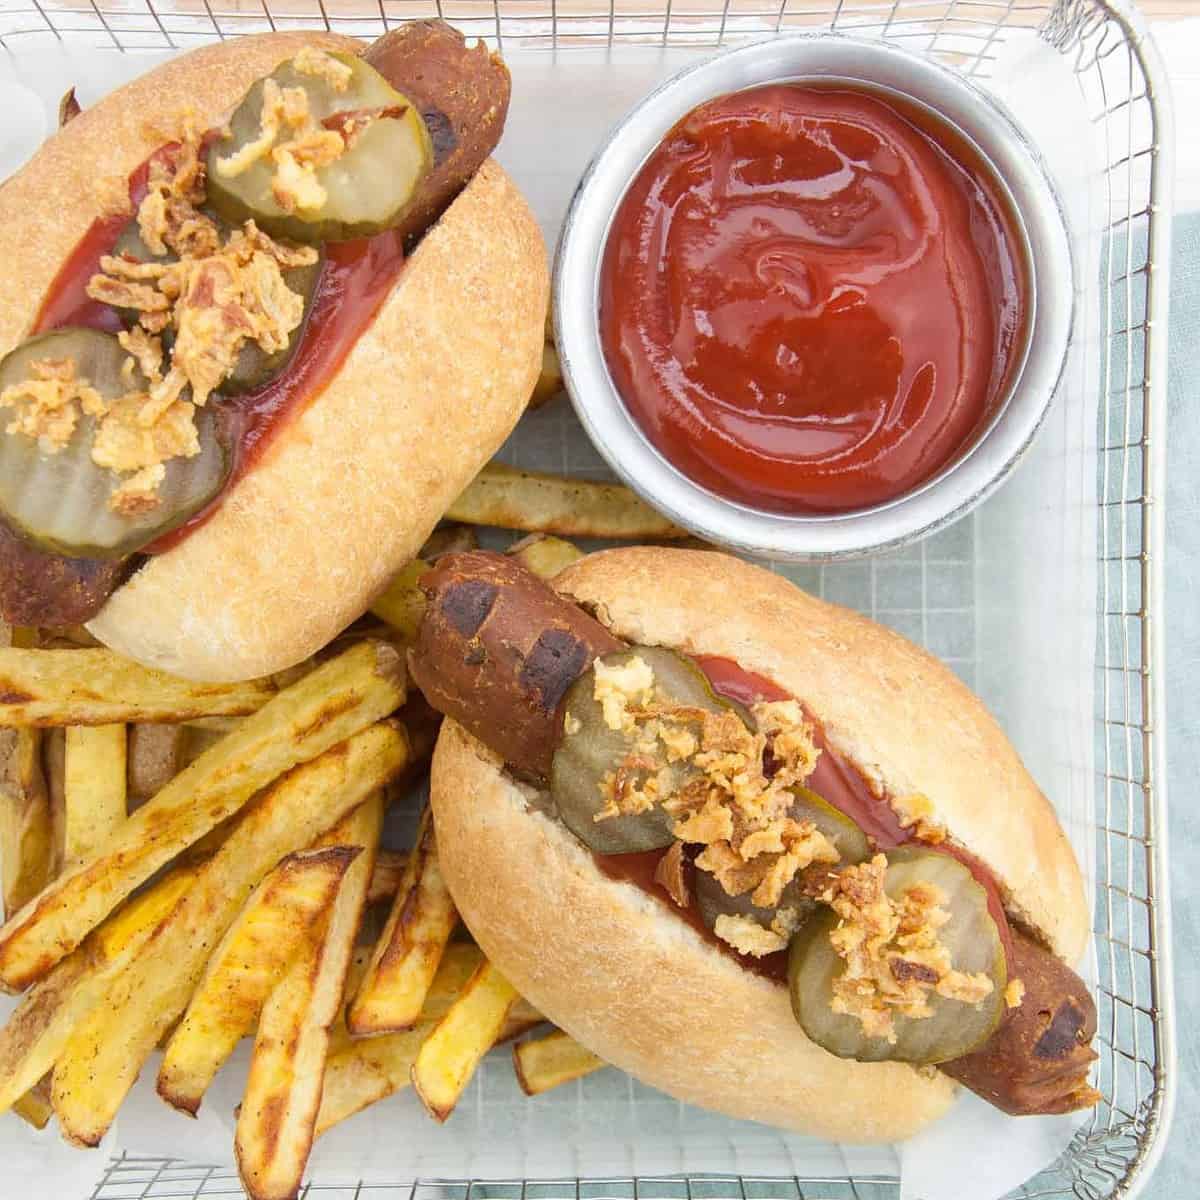  Fire up the grill and get ready to enjoy some delicious vegan hot dogs!